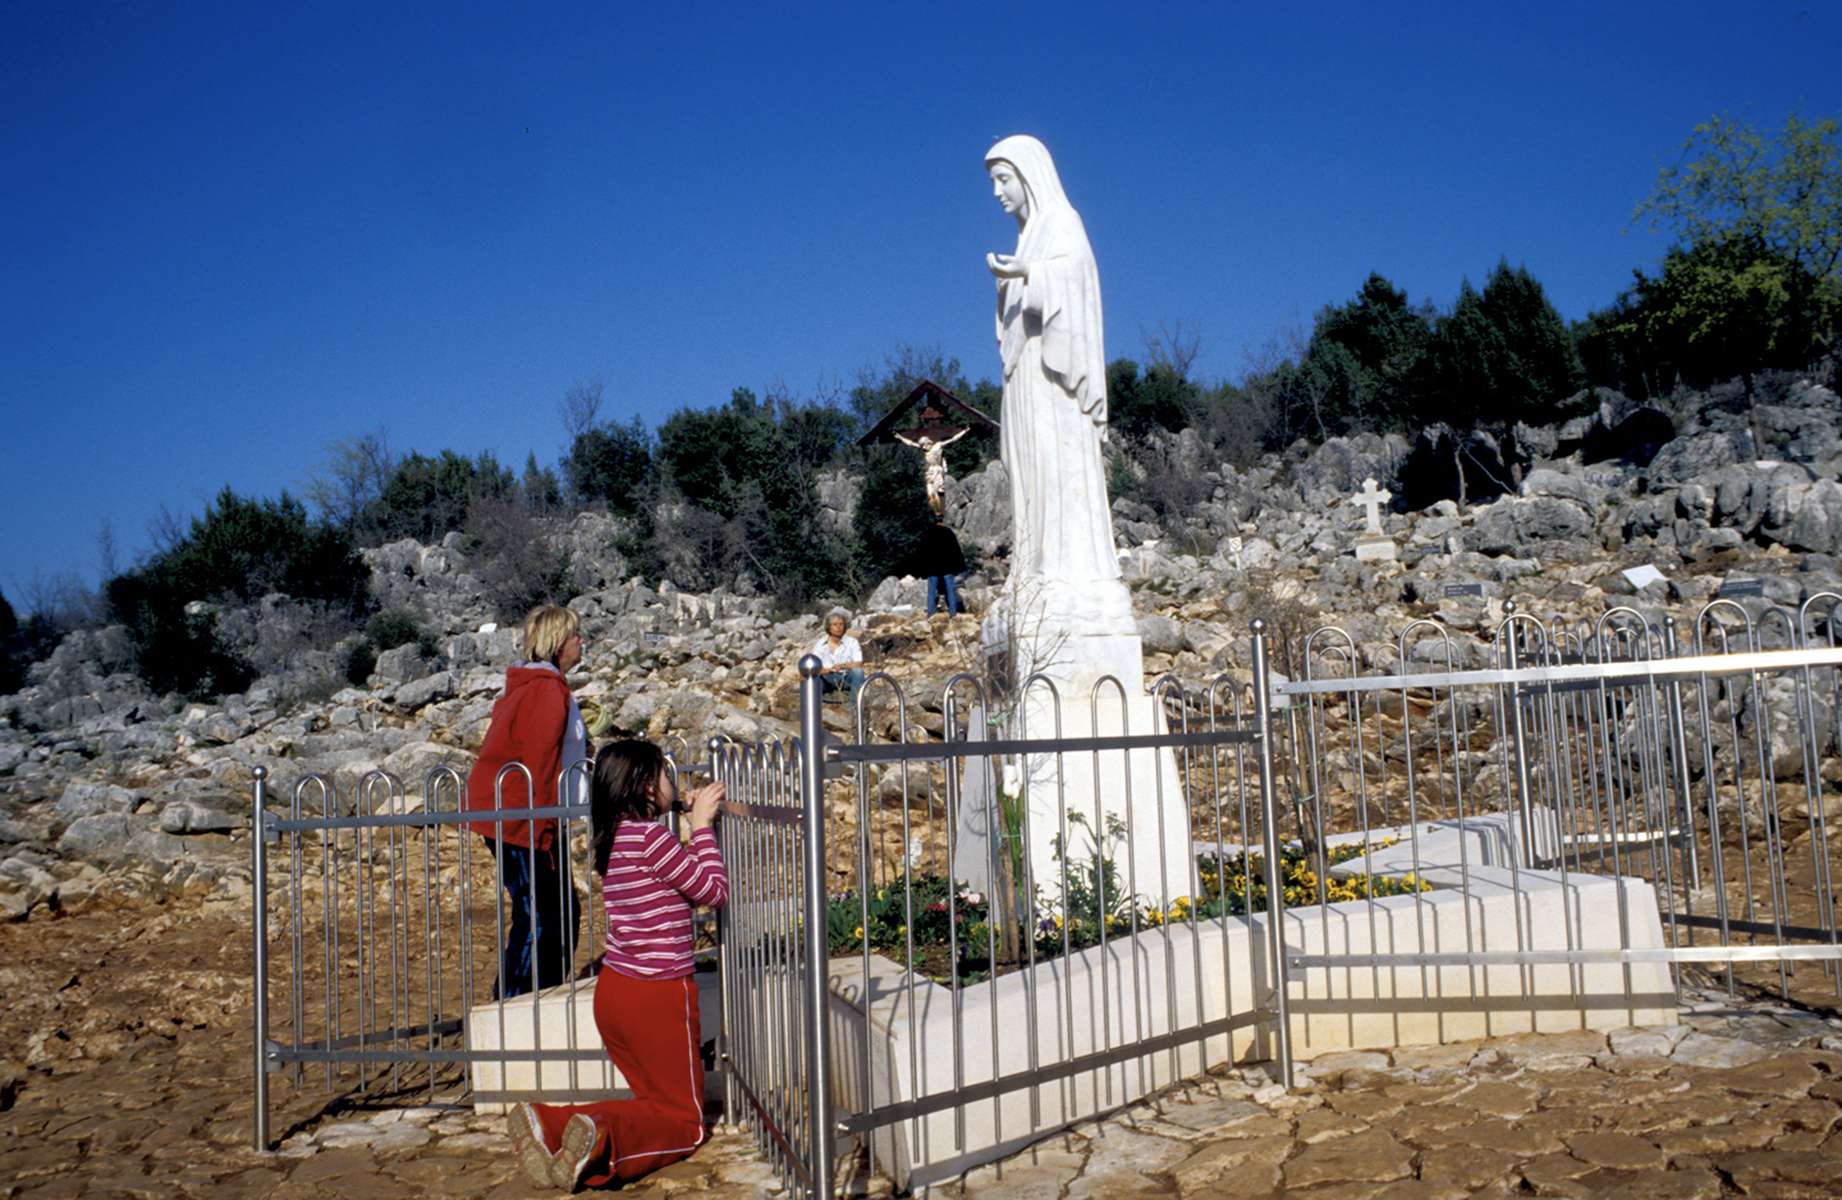 Statue of the Virgin Mary marks the spot where six teenagers from Medzugorge claim that the mother of Jesus came to them in a vision in 1981 and gave them a message of peace. Thousands of religious pilgrims from around the world visit the site each year. Several of the teenagers, now grown, say they still have regular visions of Mary, who continues to give them messages to share with the world.